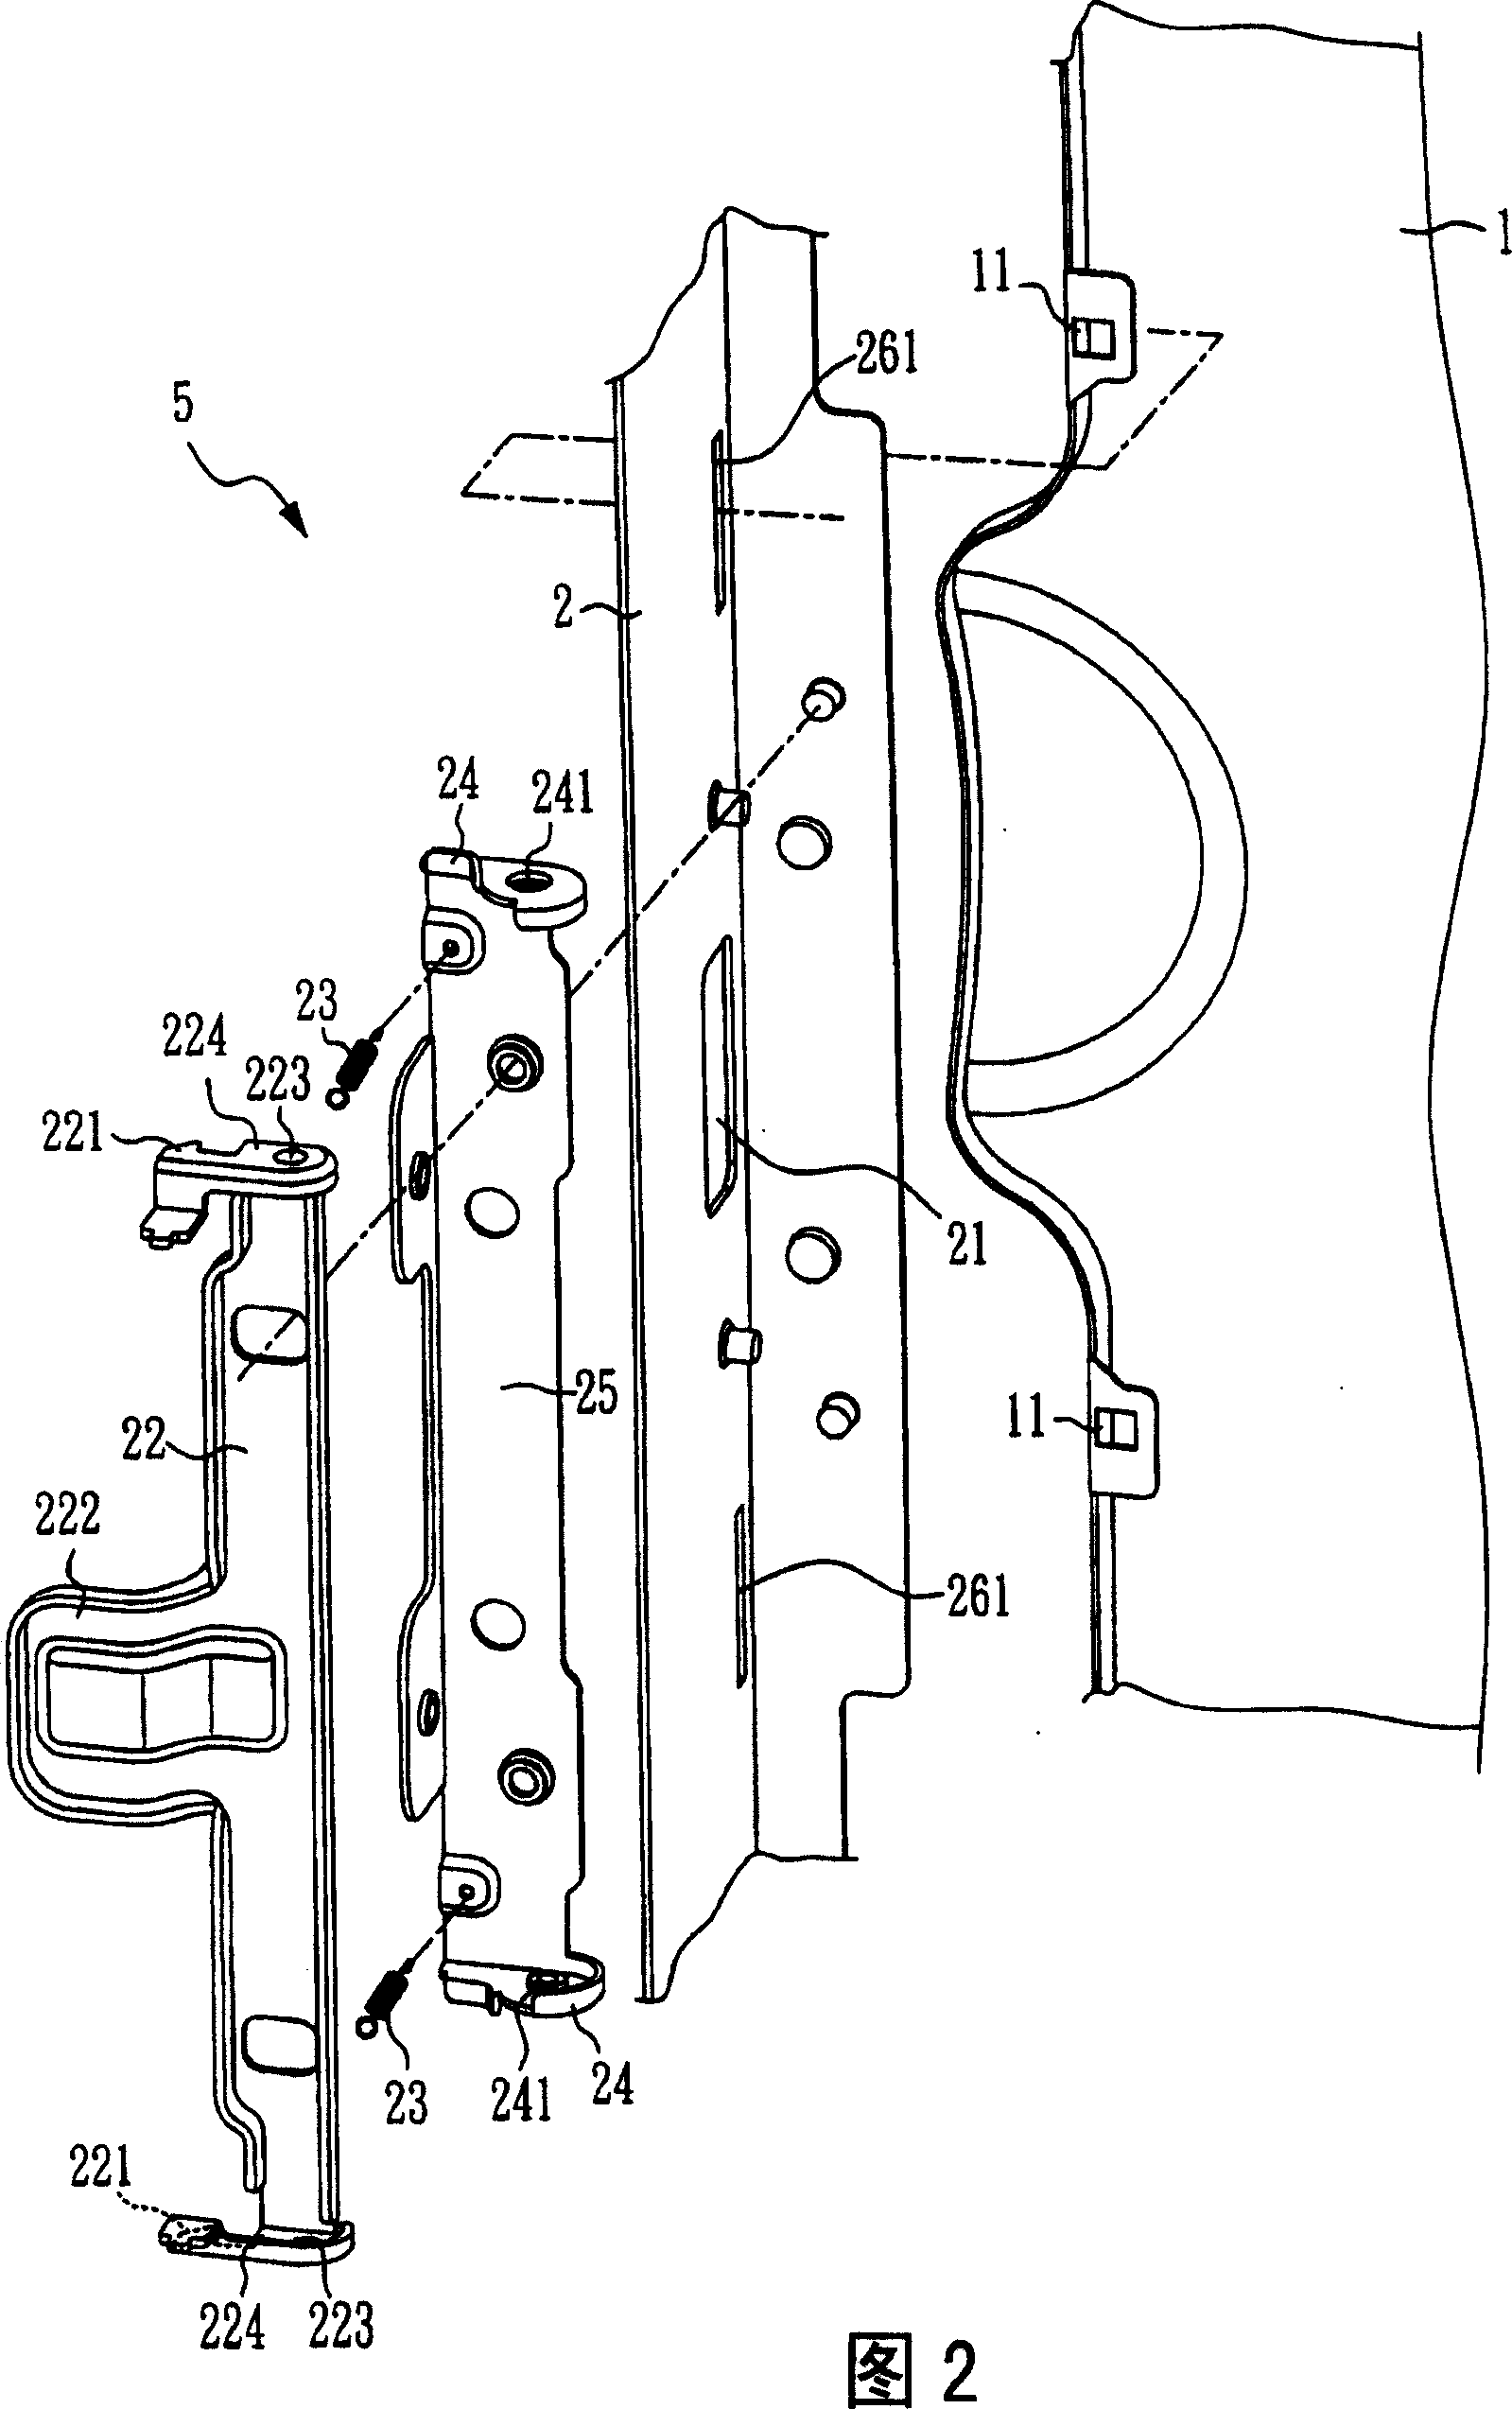 Electronic product with casing mounting-dismounting structure